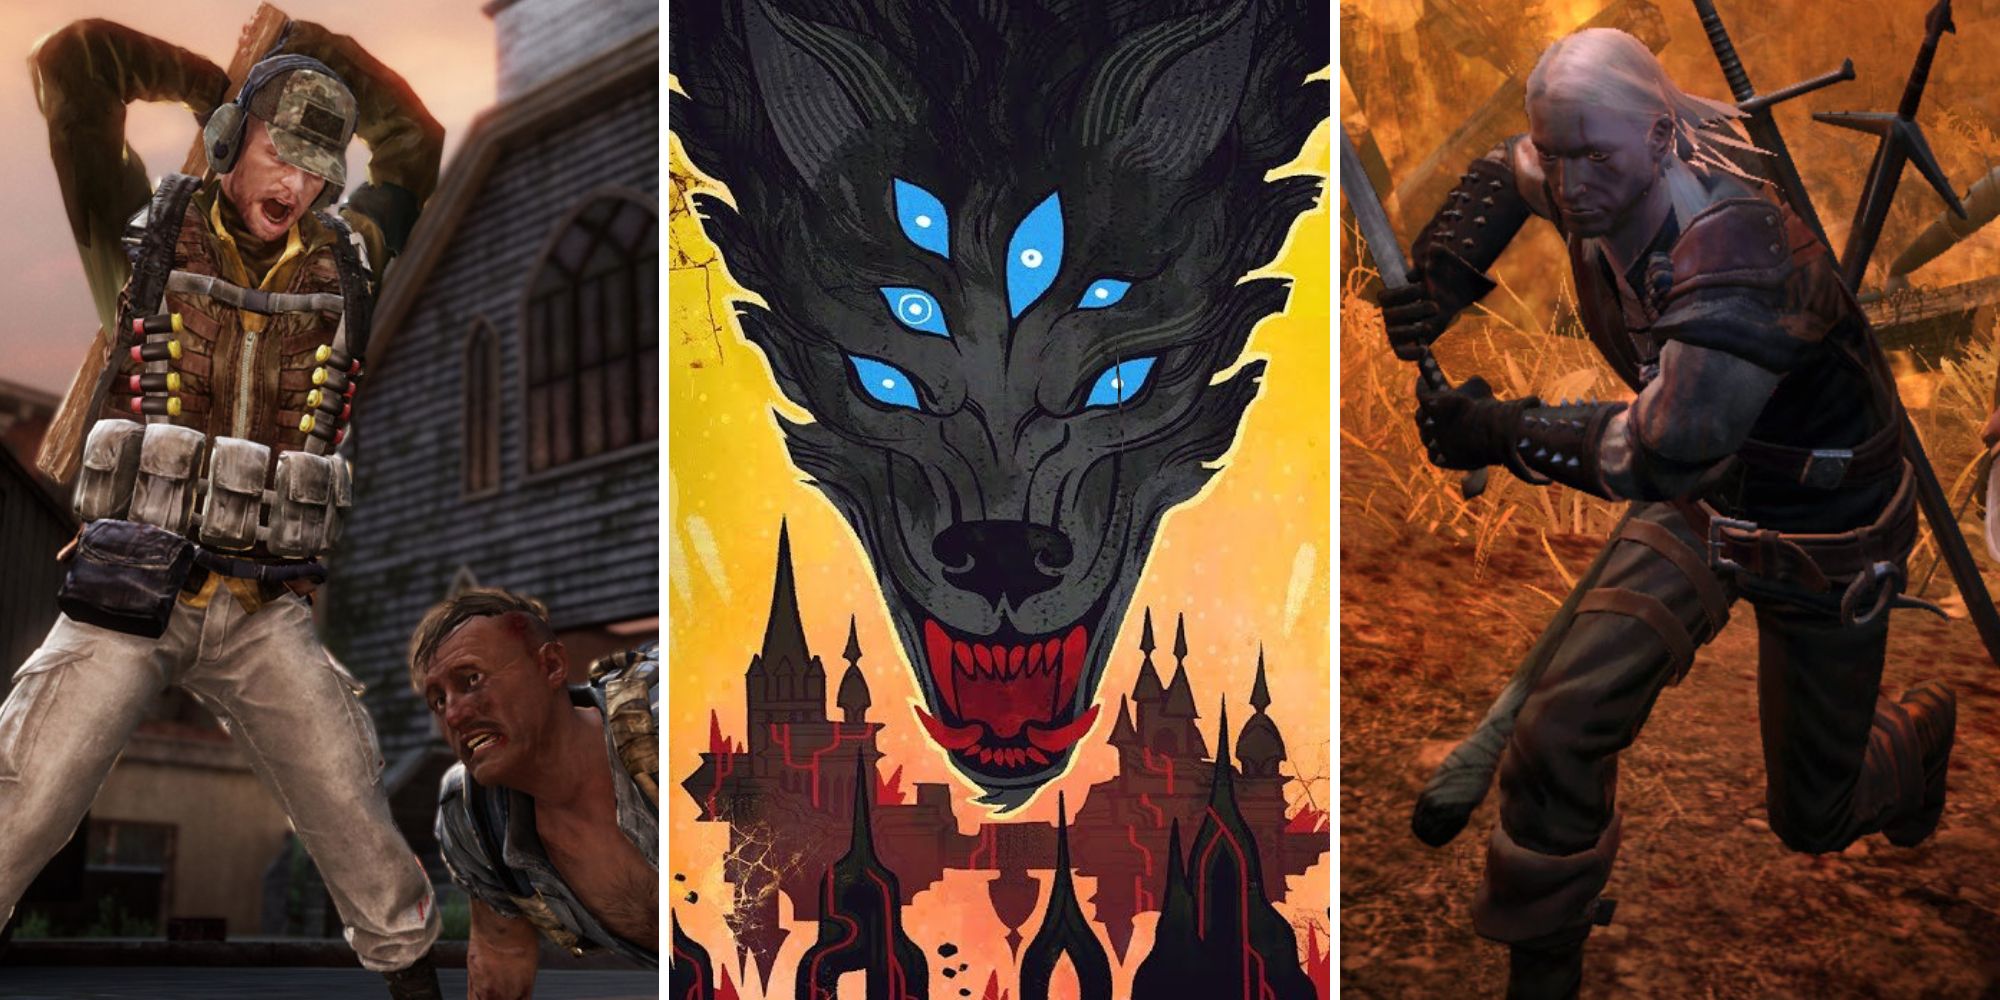 Dragon Age: Dreadwolf has hit its Alpha milestone and is playable start to  finish